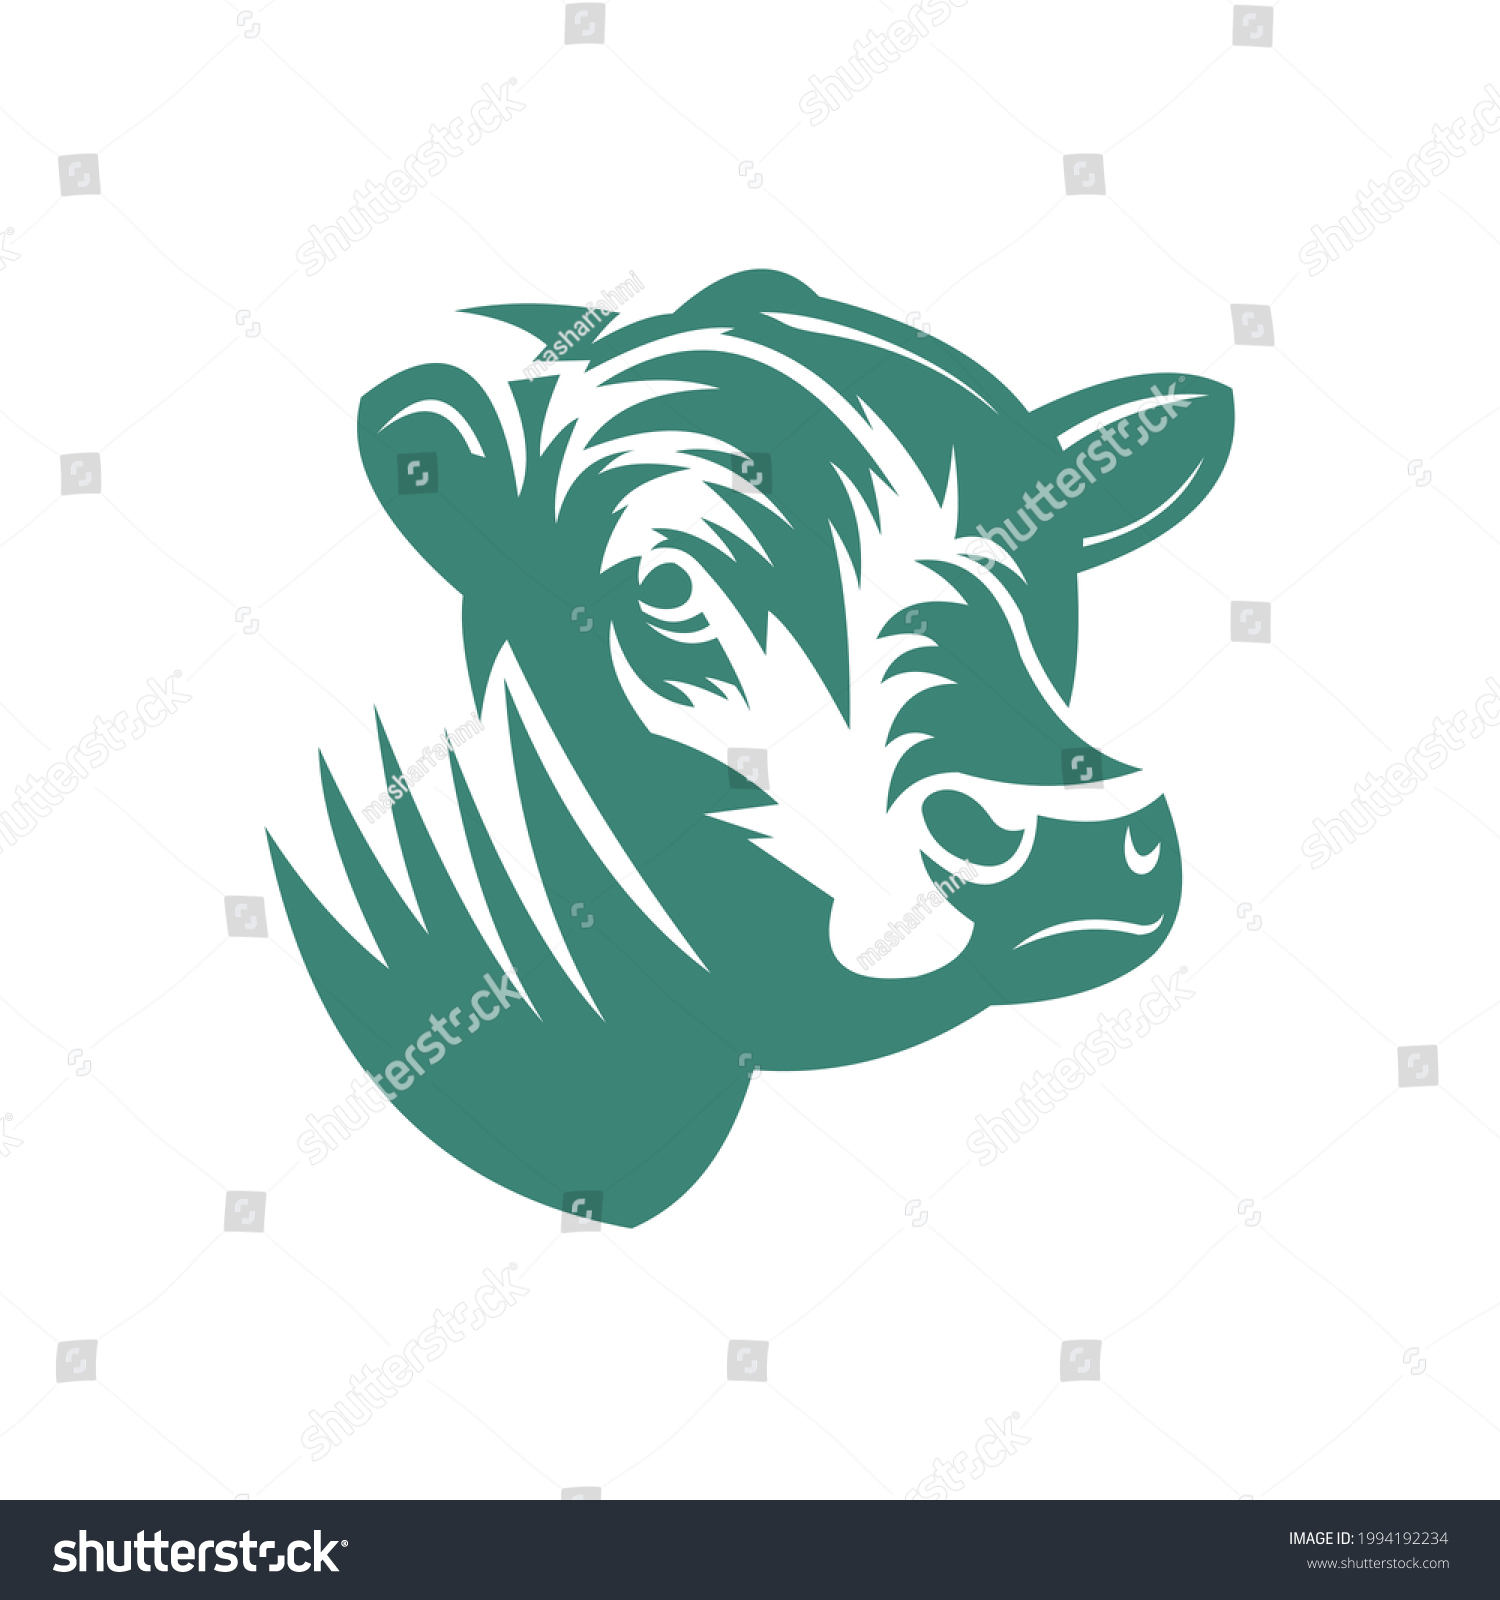 SVG of simple angus bull head logo, silhouette of green strong bull vector illustrations svg